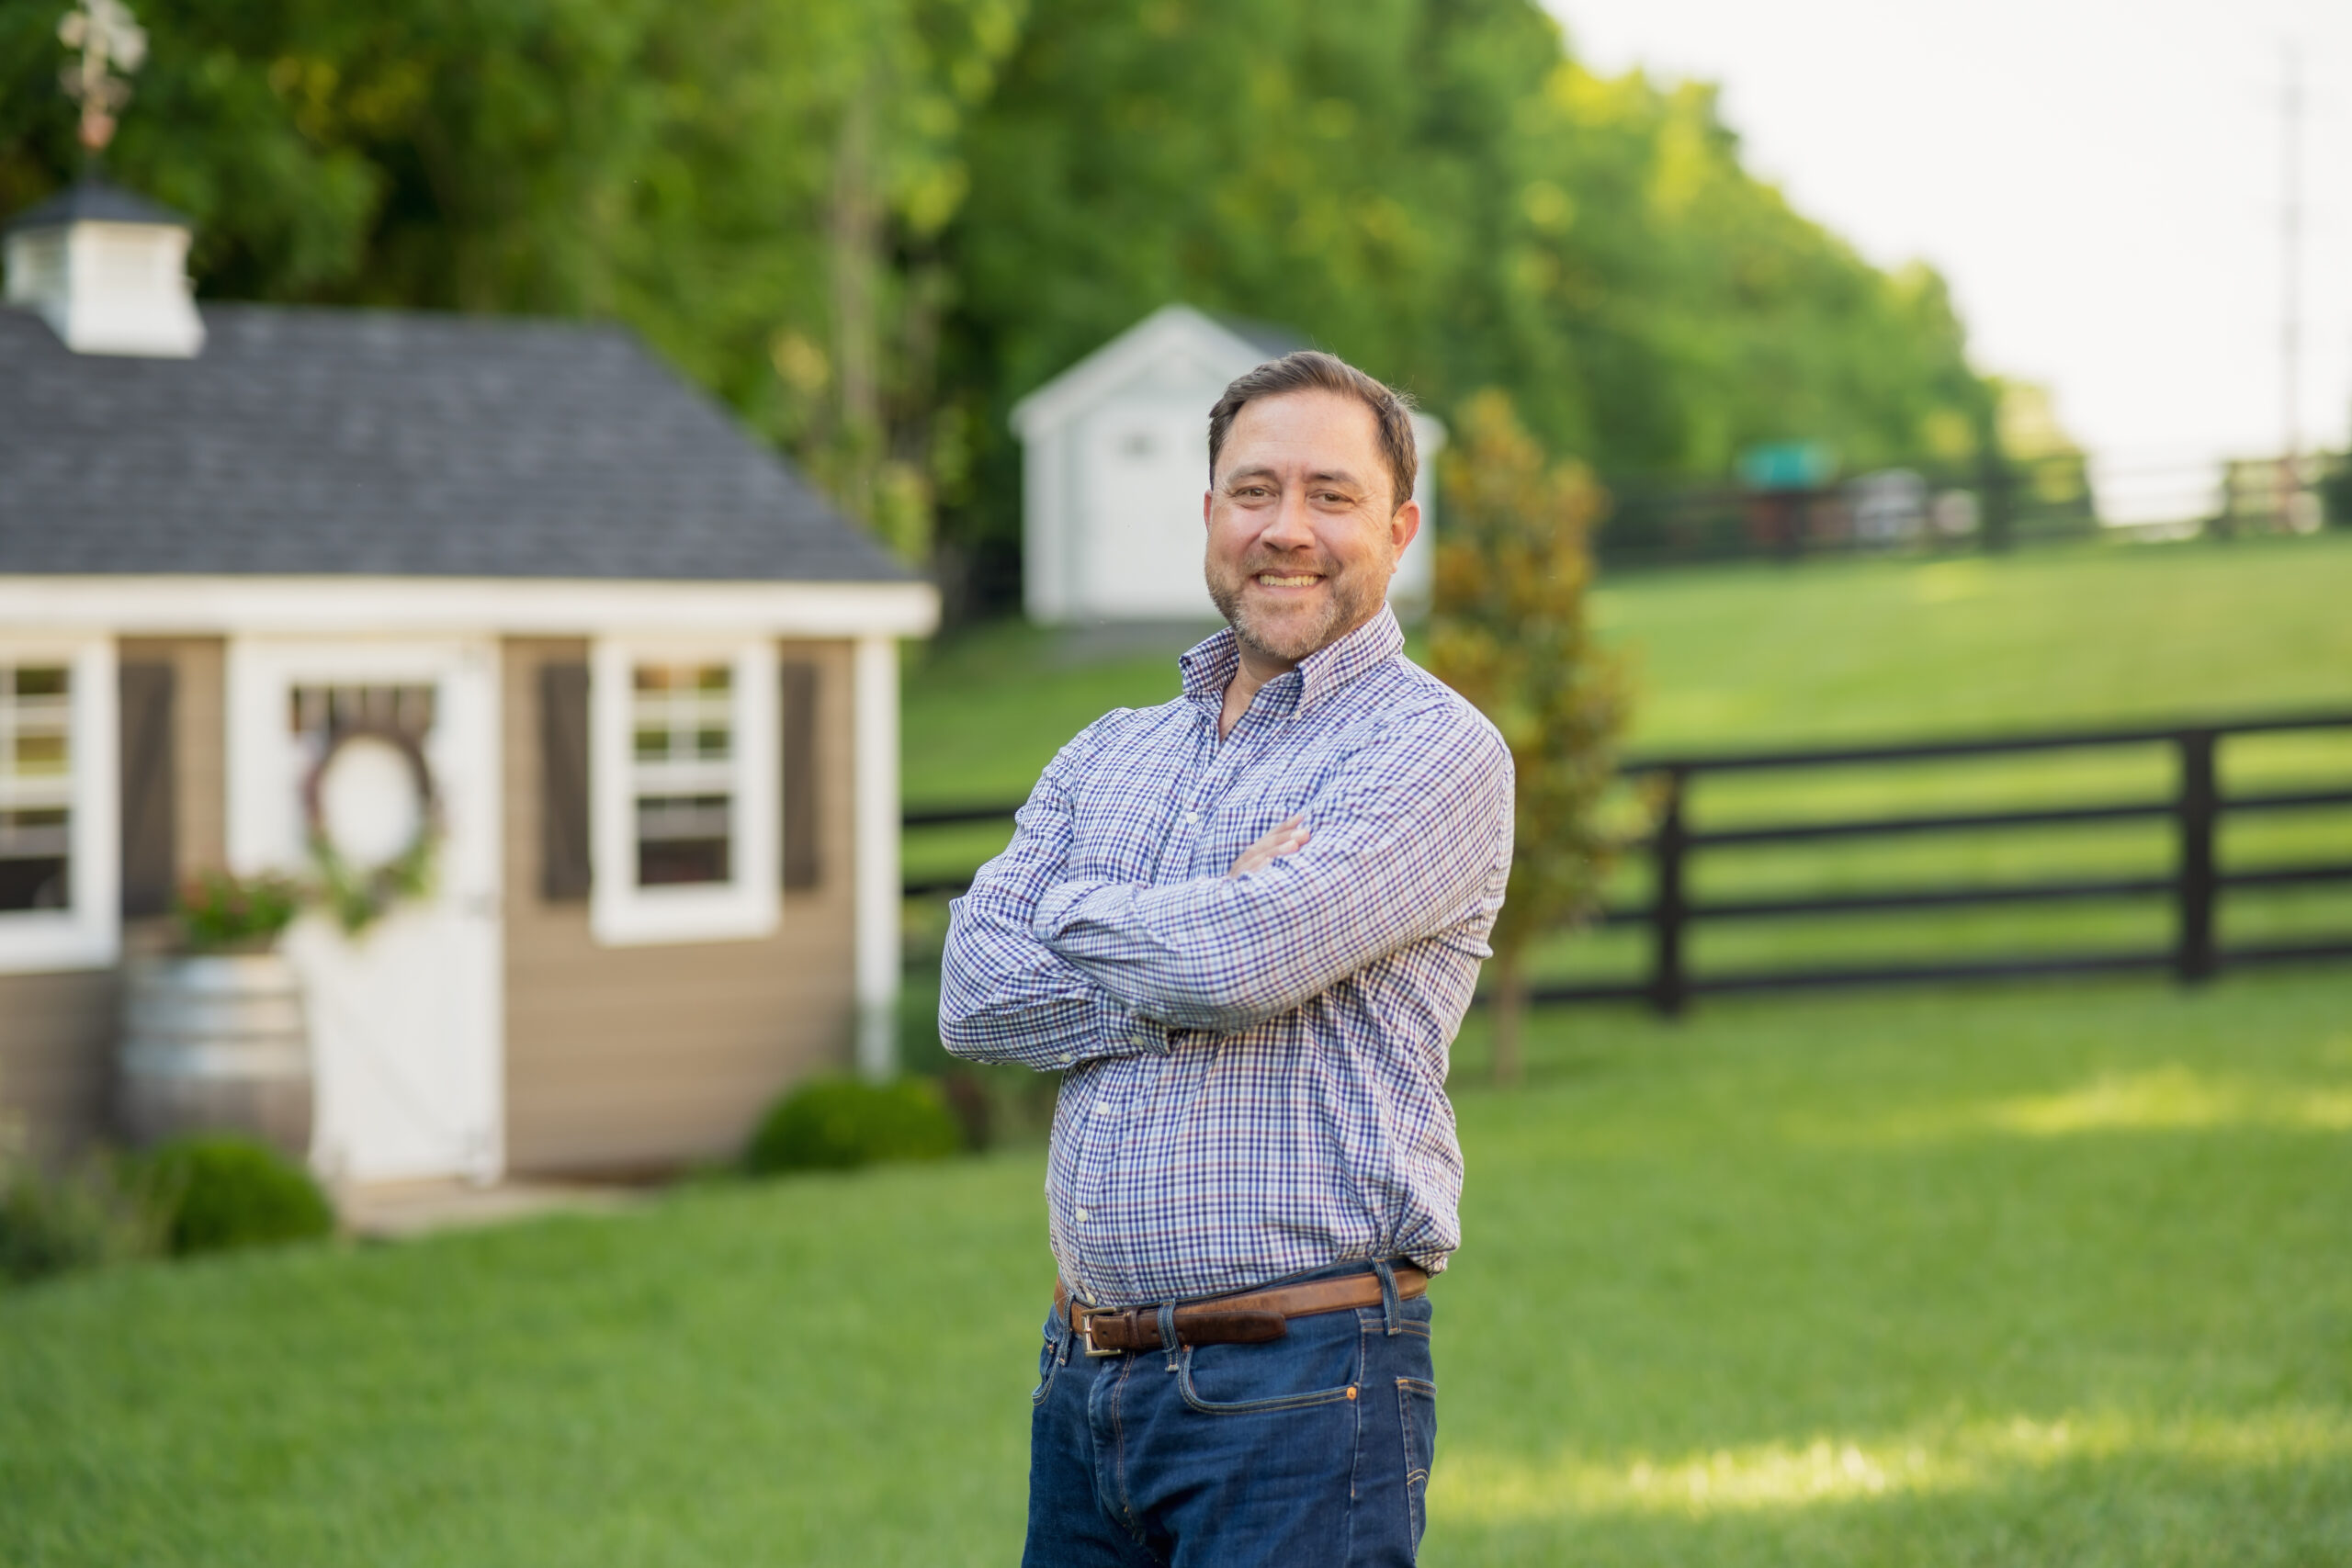 personal branding photo for realtors showing smiling male realtor in striped shirt with his arms crossed in a country setting with fenced fields in the background